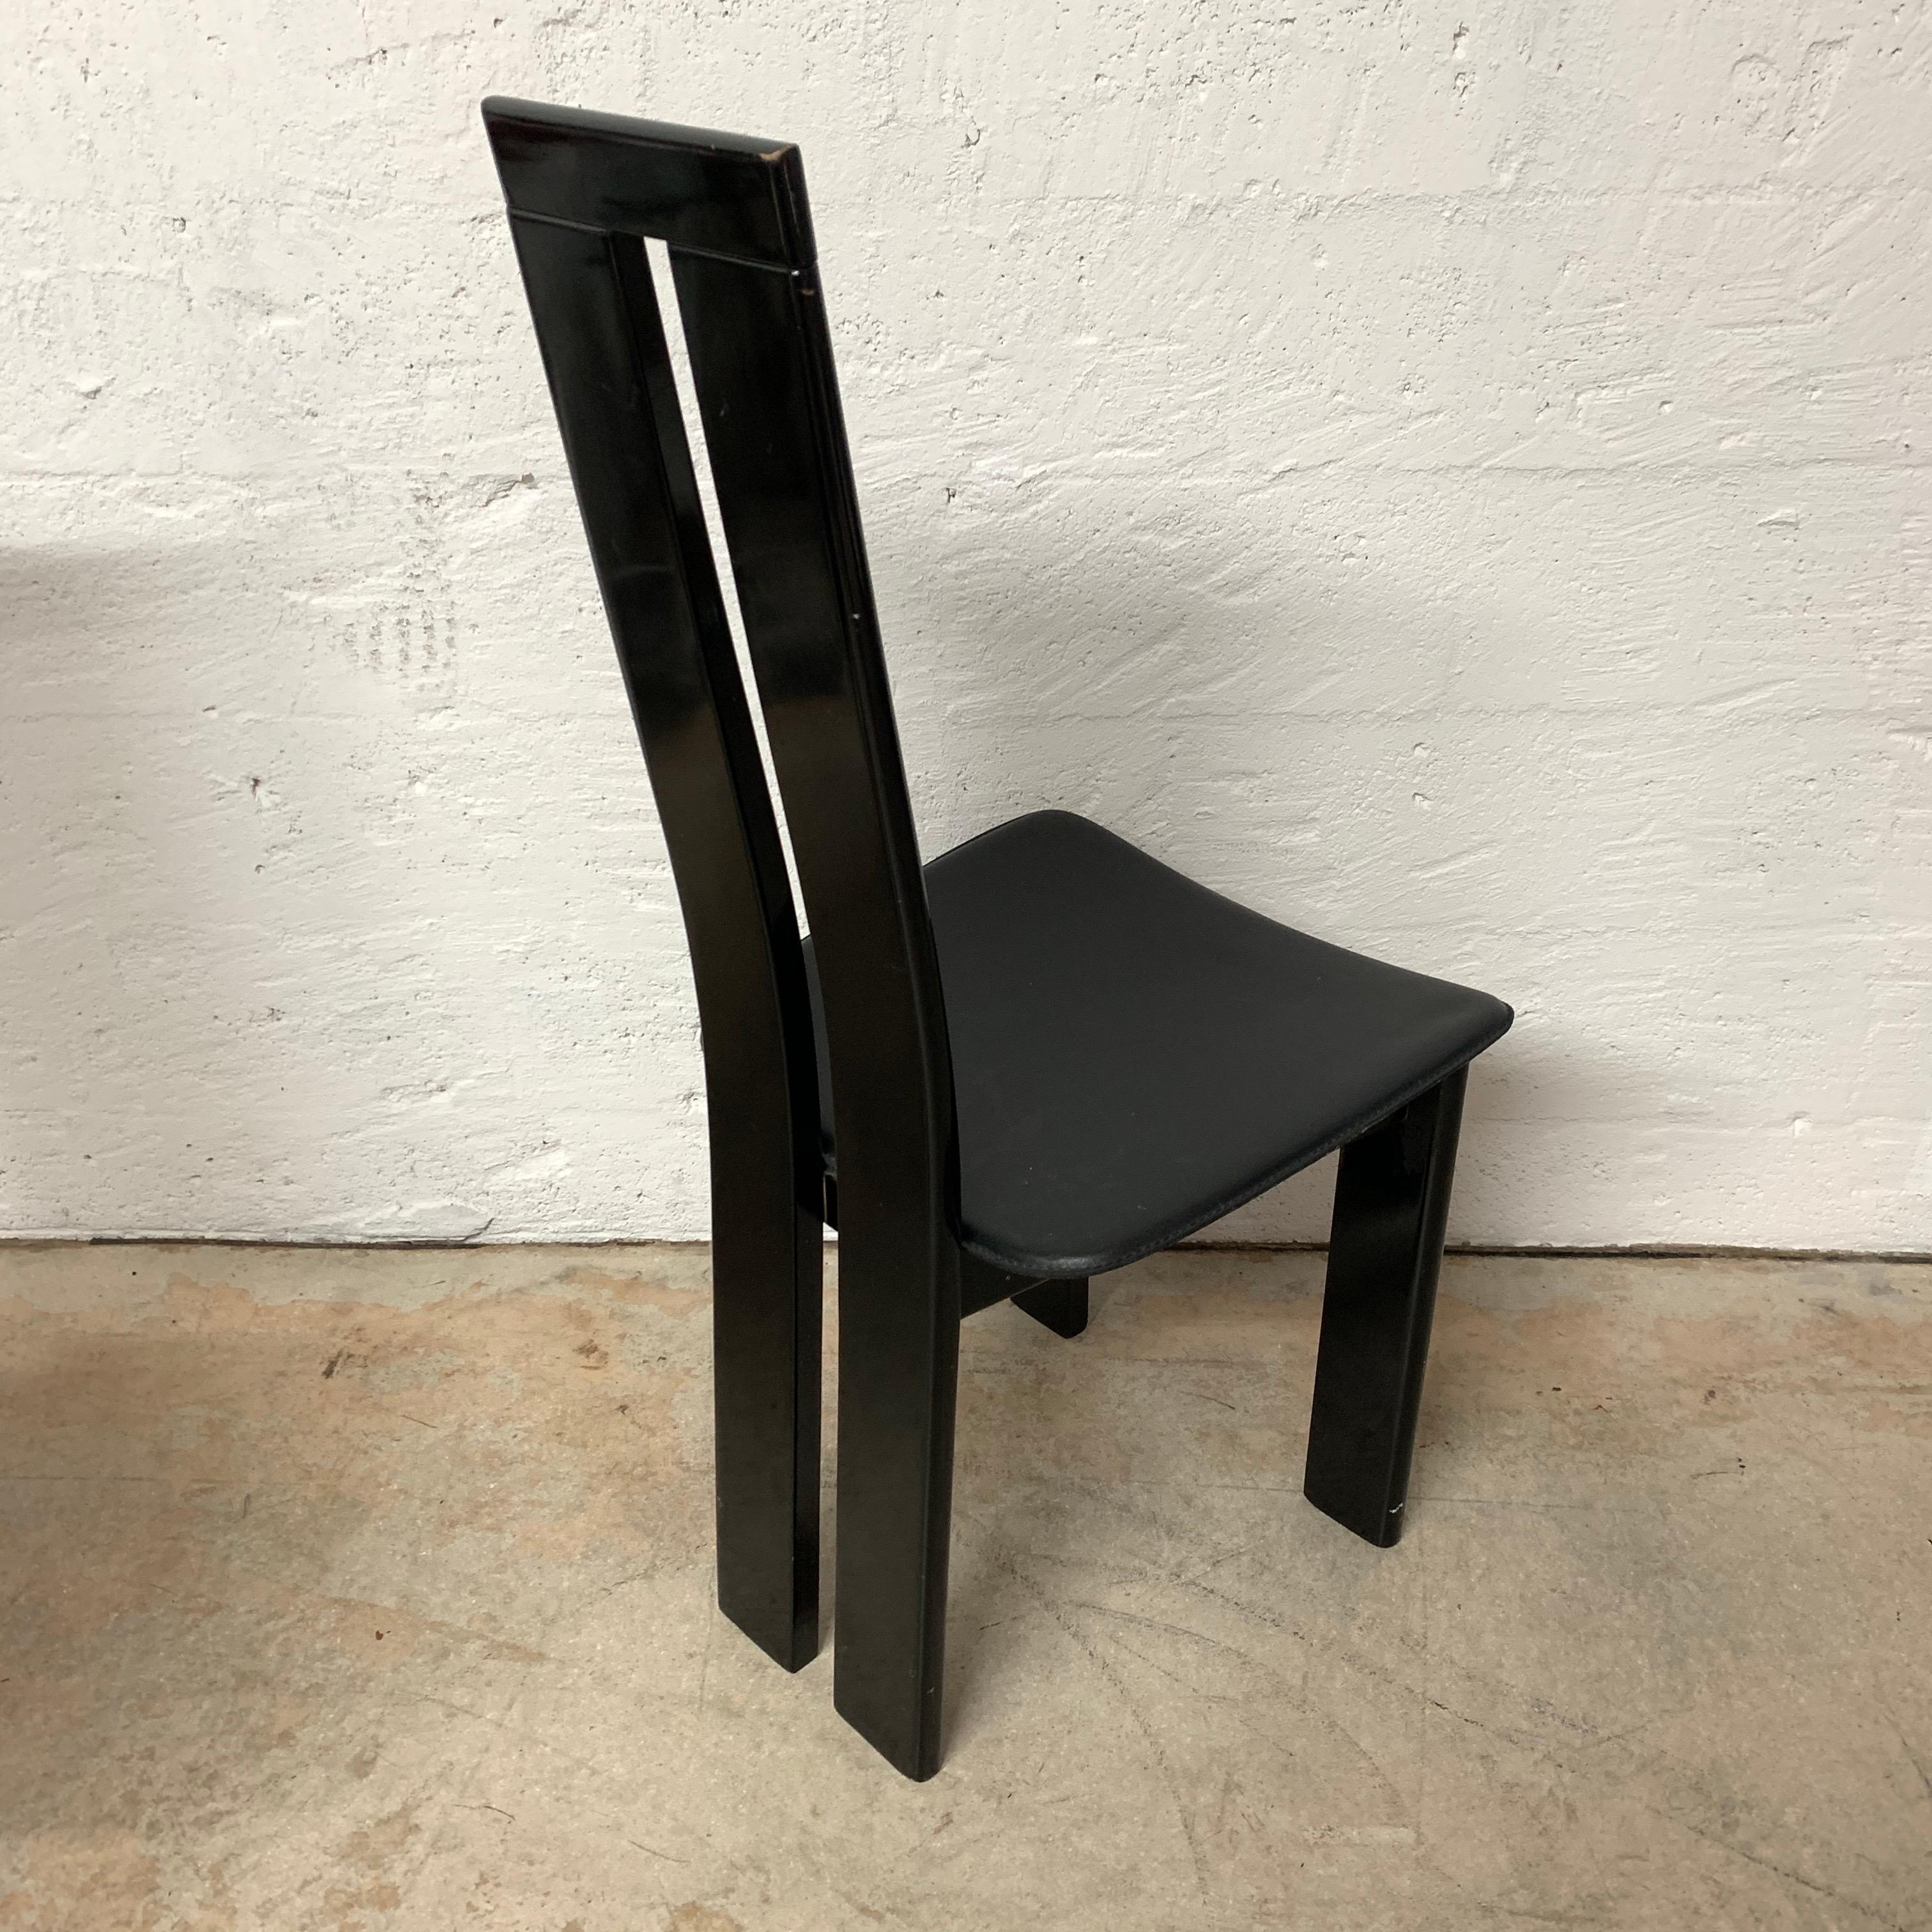 Pair of Italian Postmodern Chairs by Massimo Vignelli 2